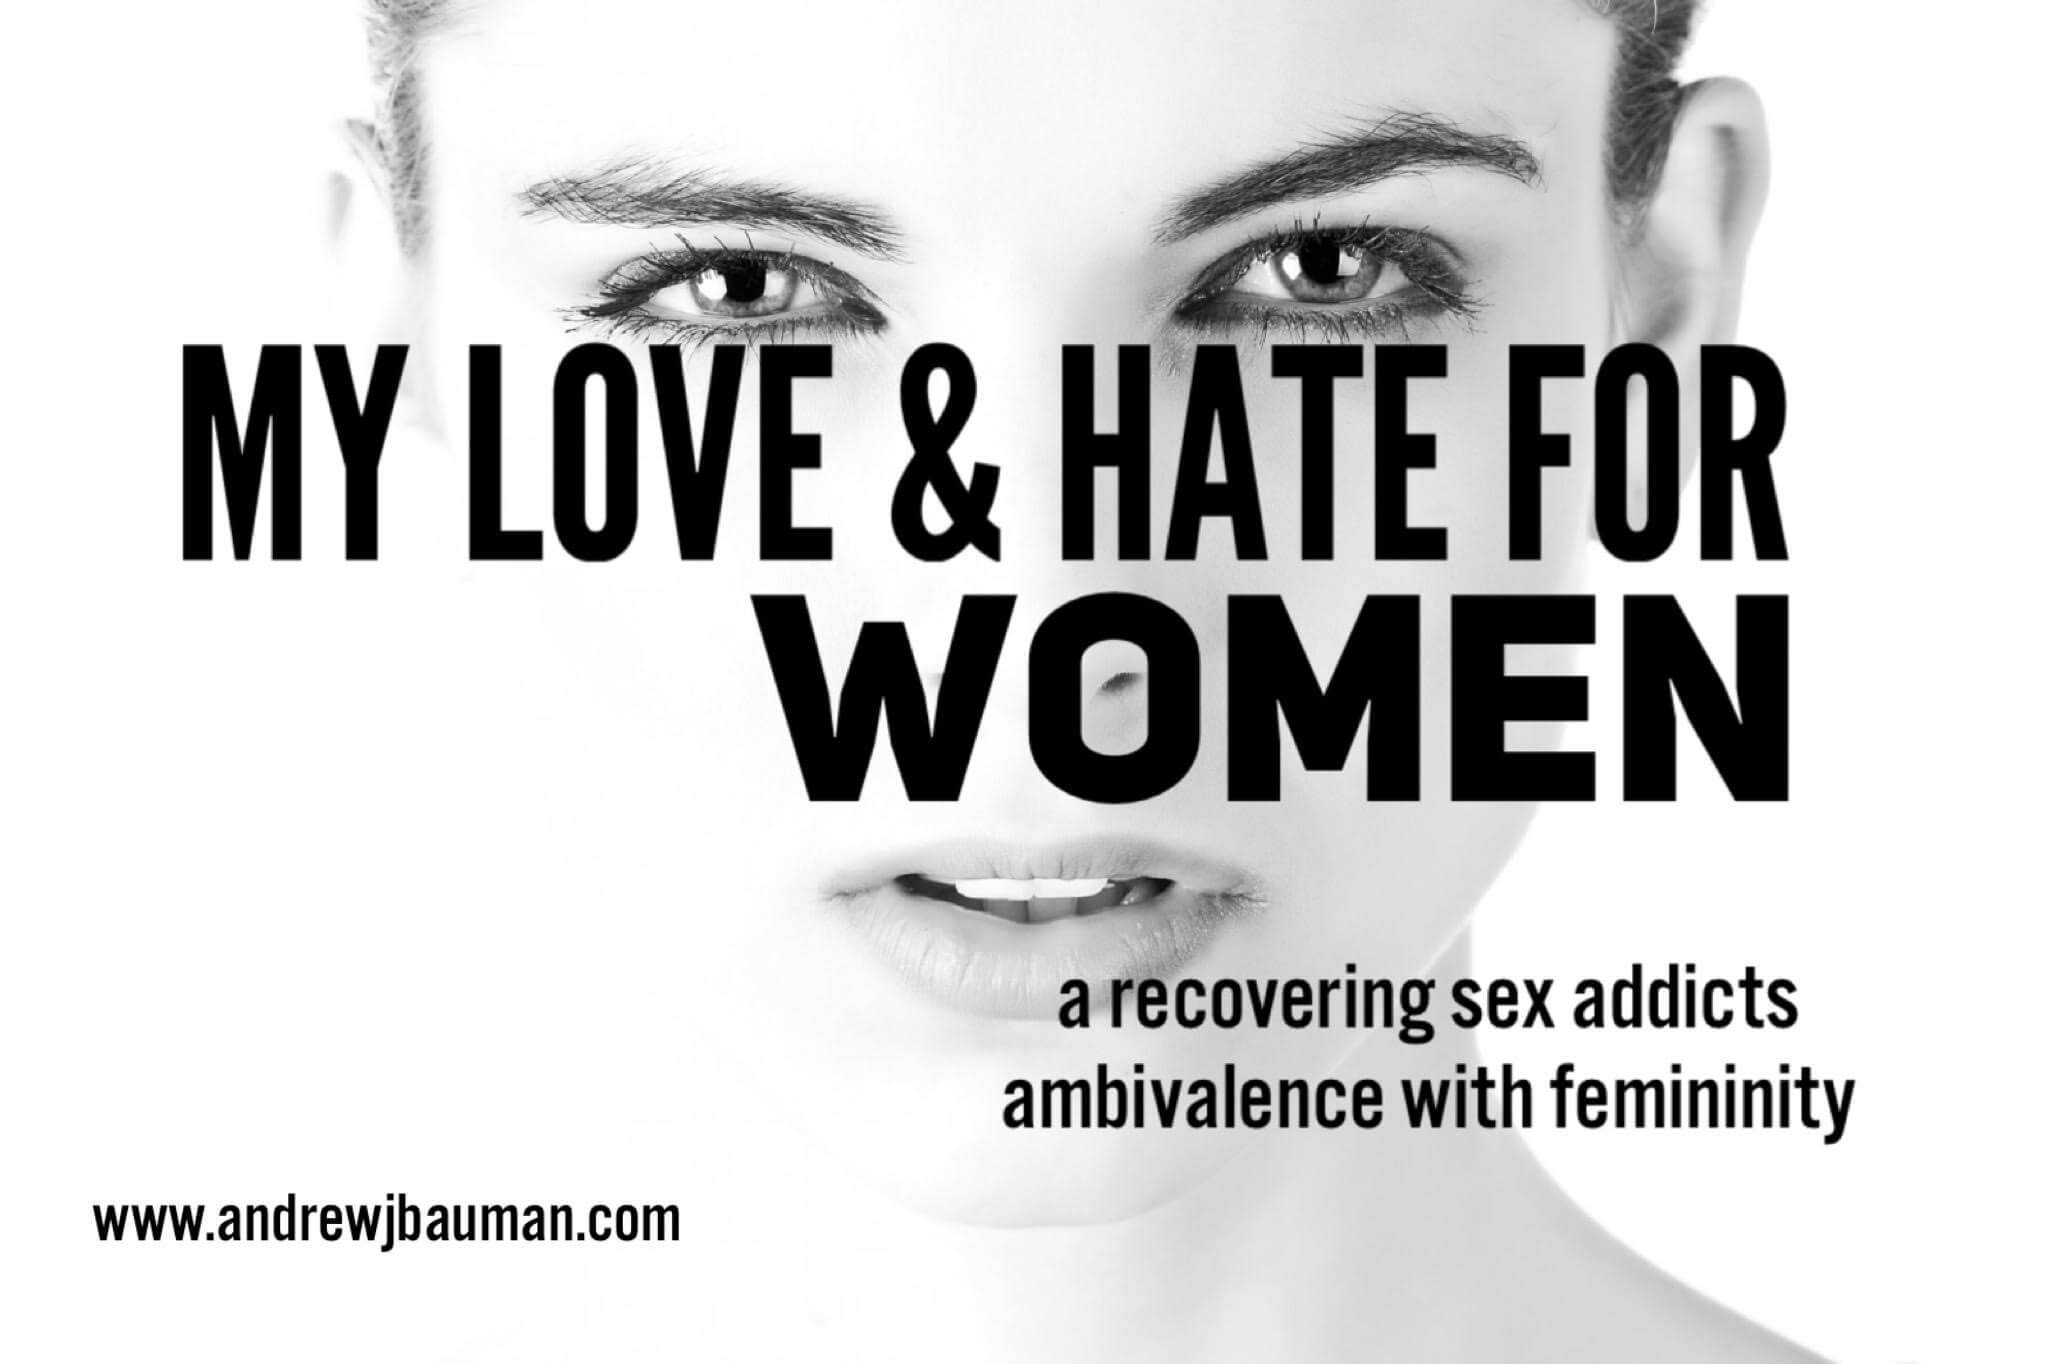 My Love and Hate for Women a recovering sex addicts ambivalence with femininity pic pic